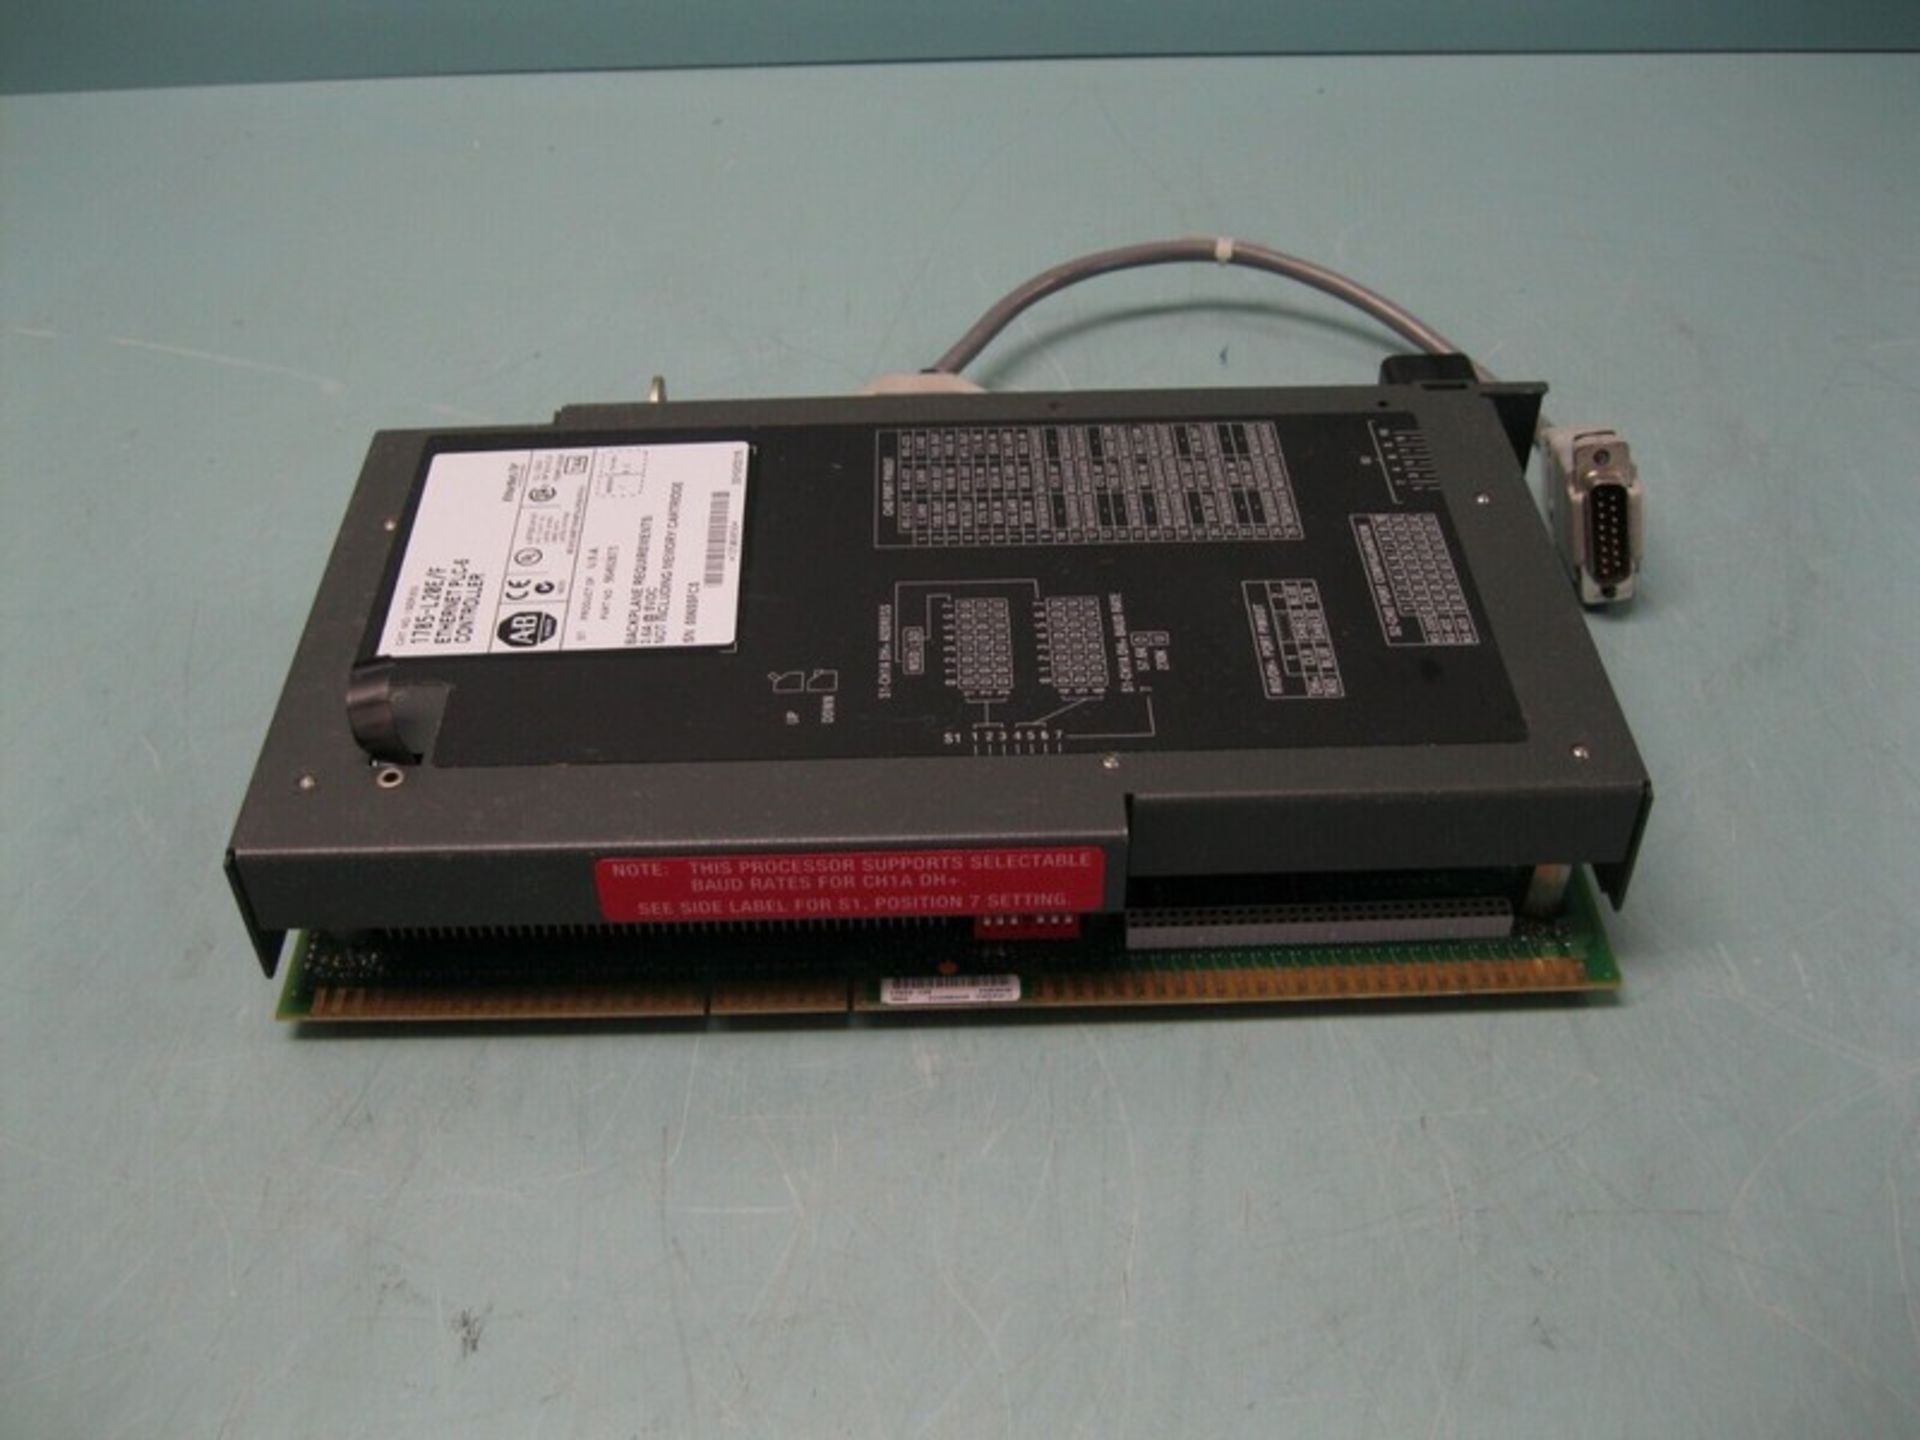 Allen-Bradley 1785-L20E Ser F Ethernet PLC - 5 Controller A18 (2957) (NOTE: Packing and Palletizing